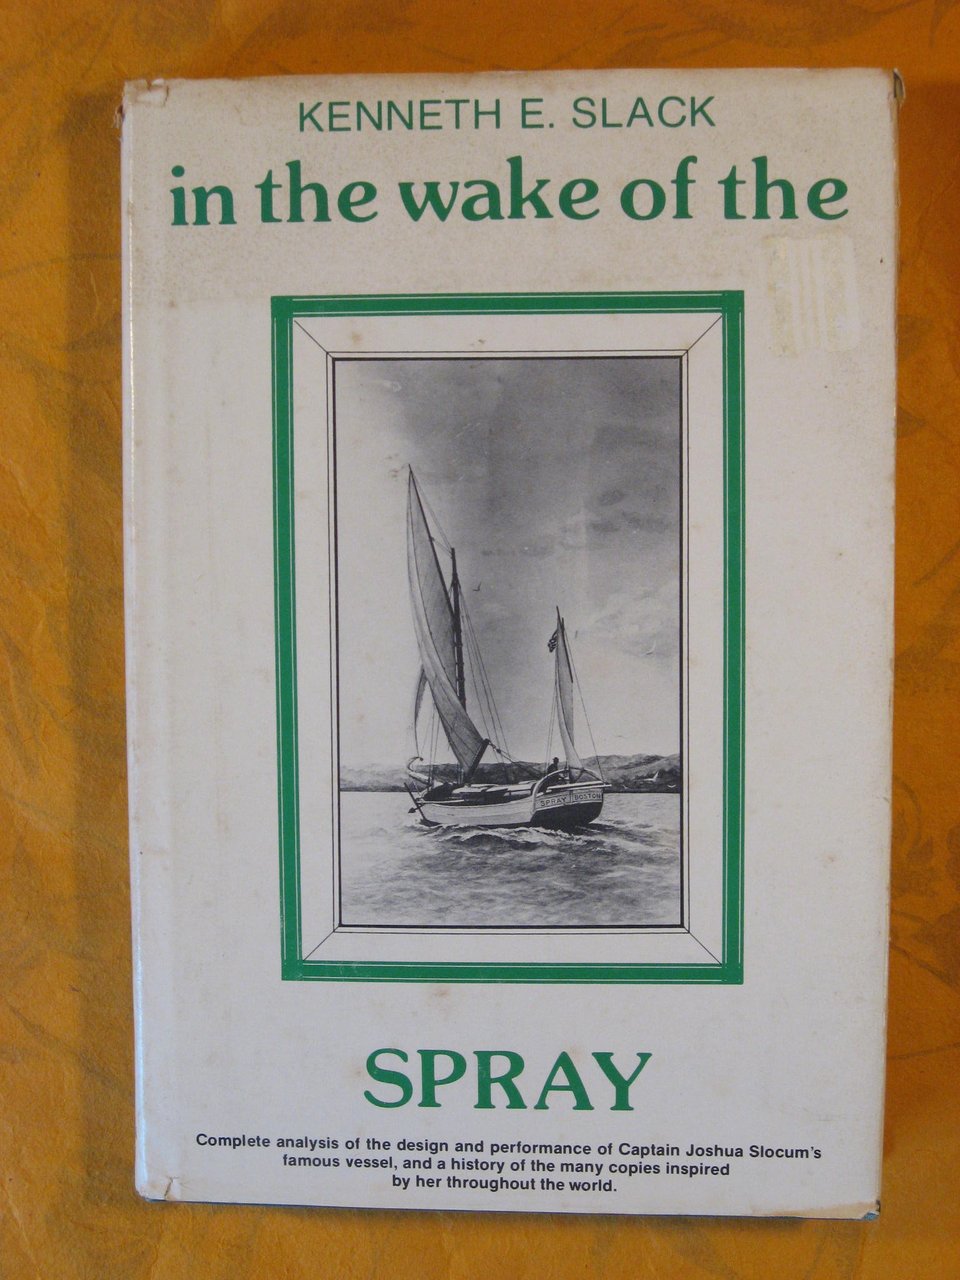 In the Wake of the Spray